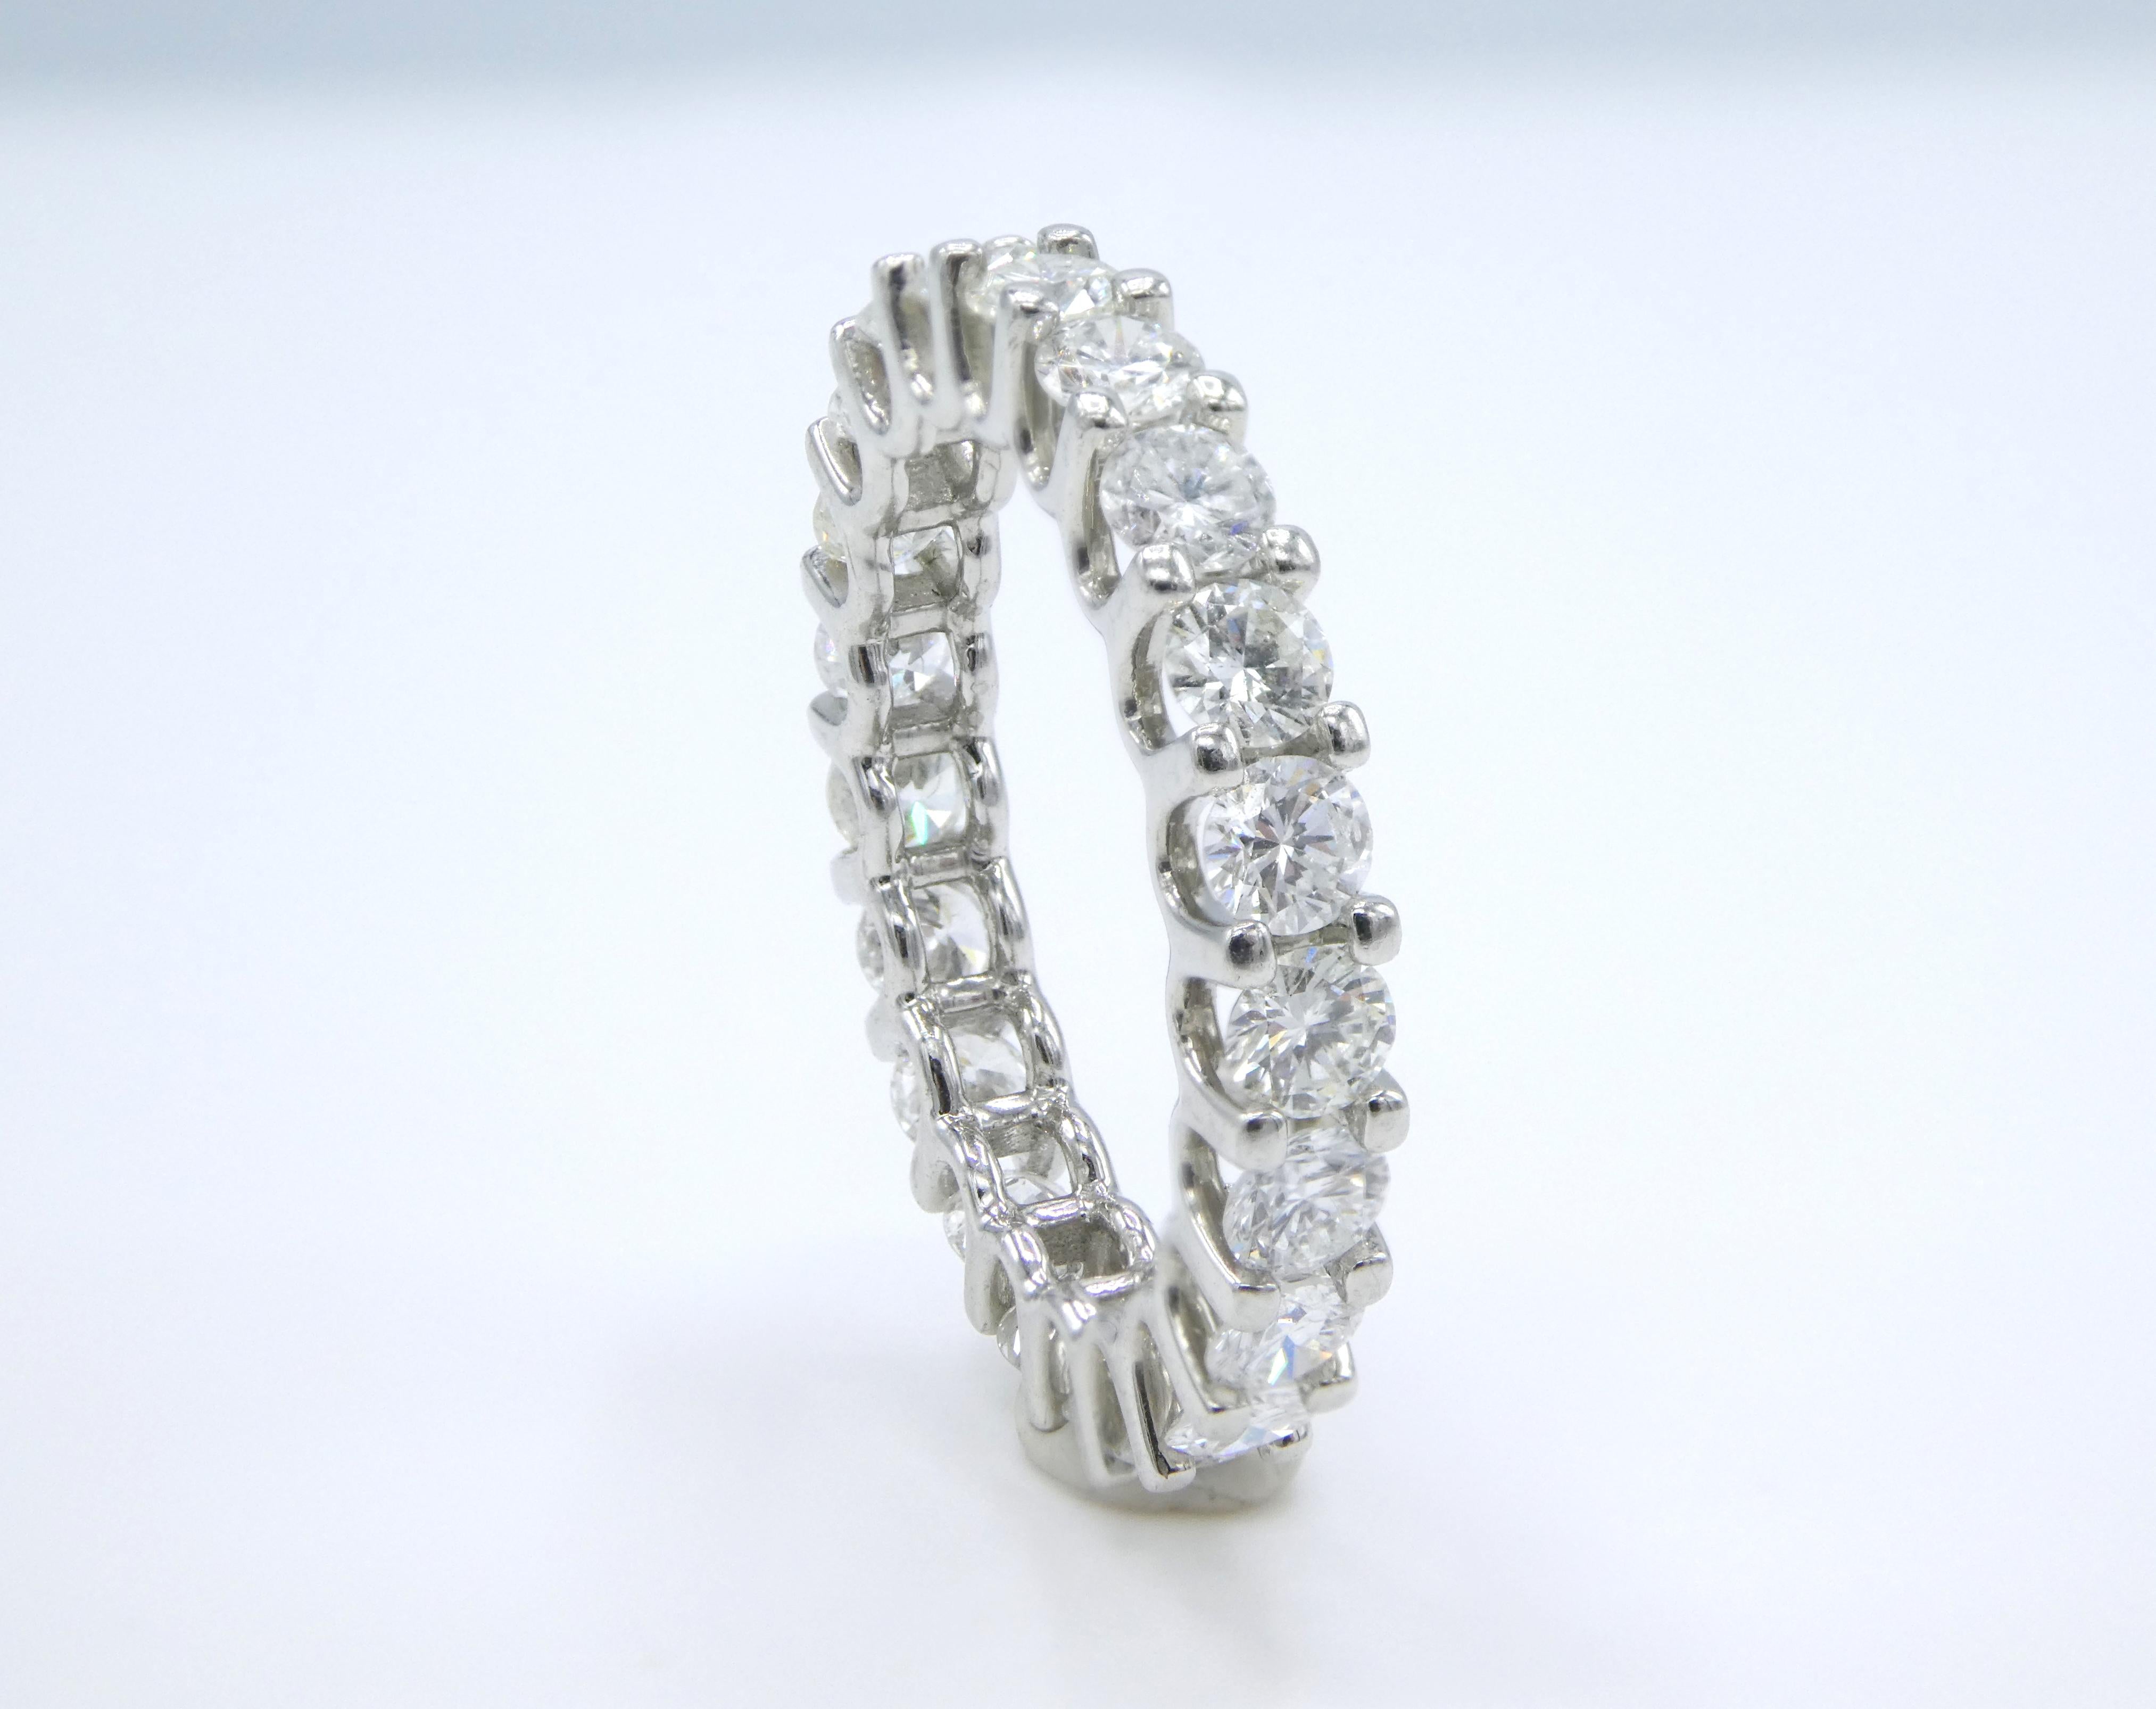 Platinum 2.30 Carat Round Natural Diamond Eternity Wedding Band Ring Size 6

Metal: Platinum
Diamonds: 21 round brilliant cut natural diamonds, approx. 2.30 CTW G VS - SI
Band is 3.1mm wide
Size: 6
Excellent condition